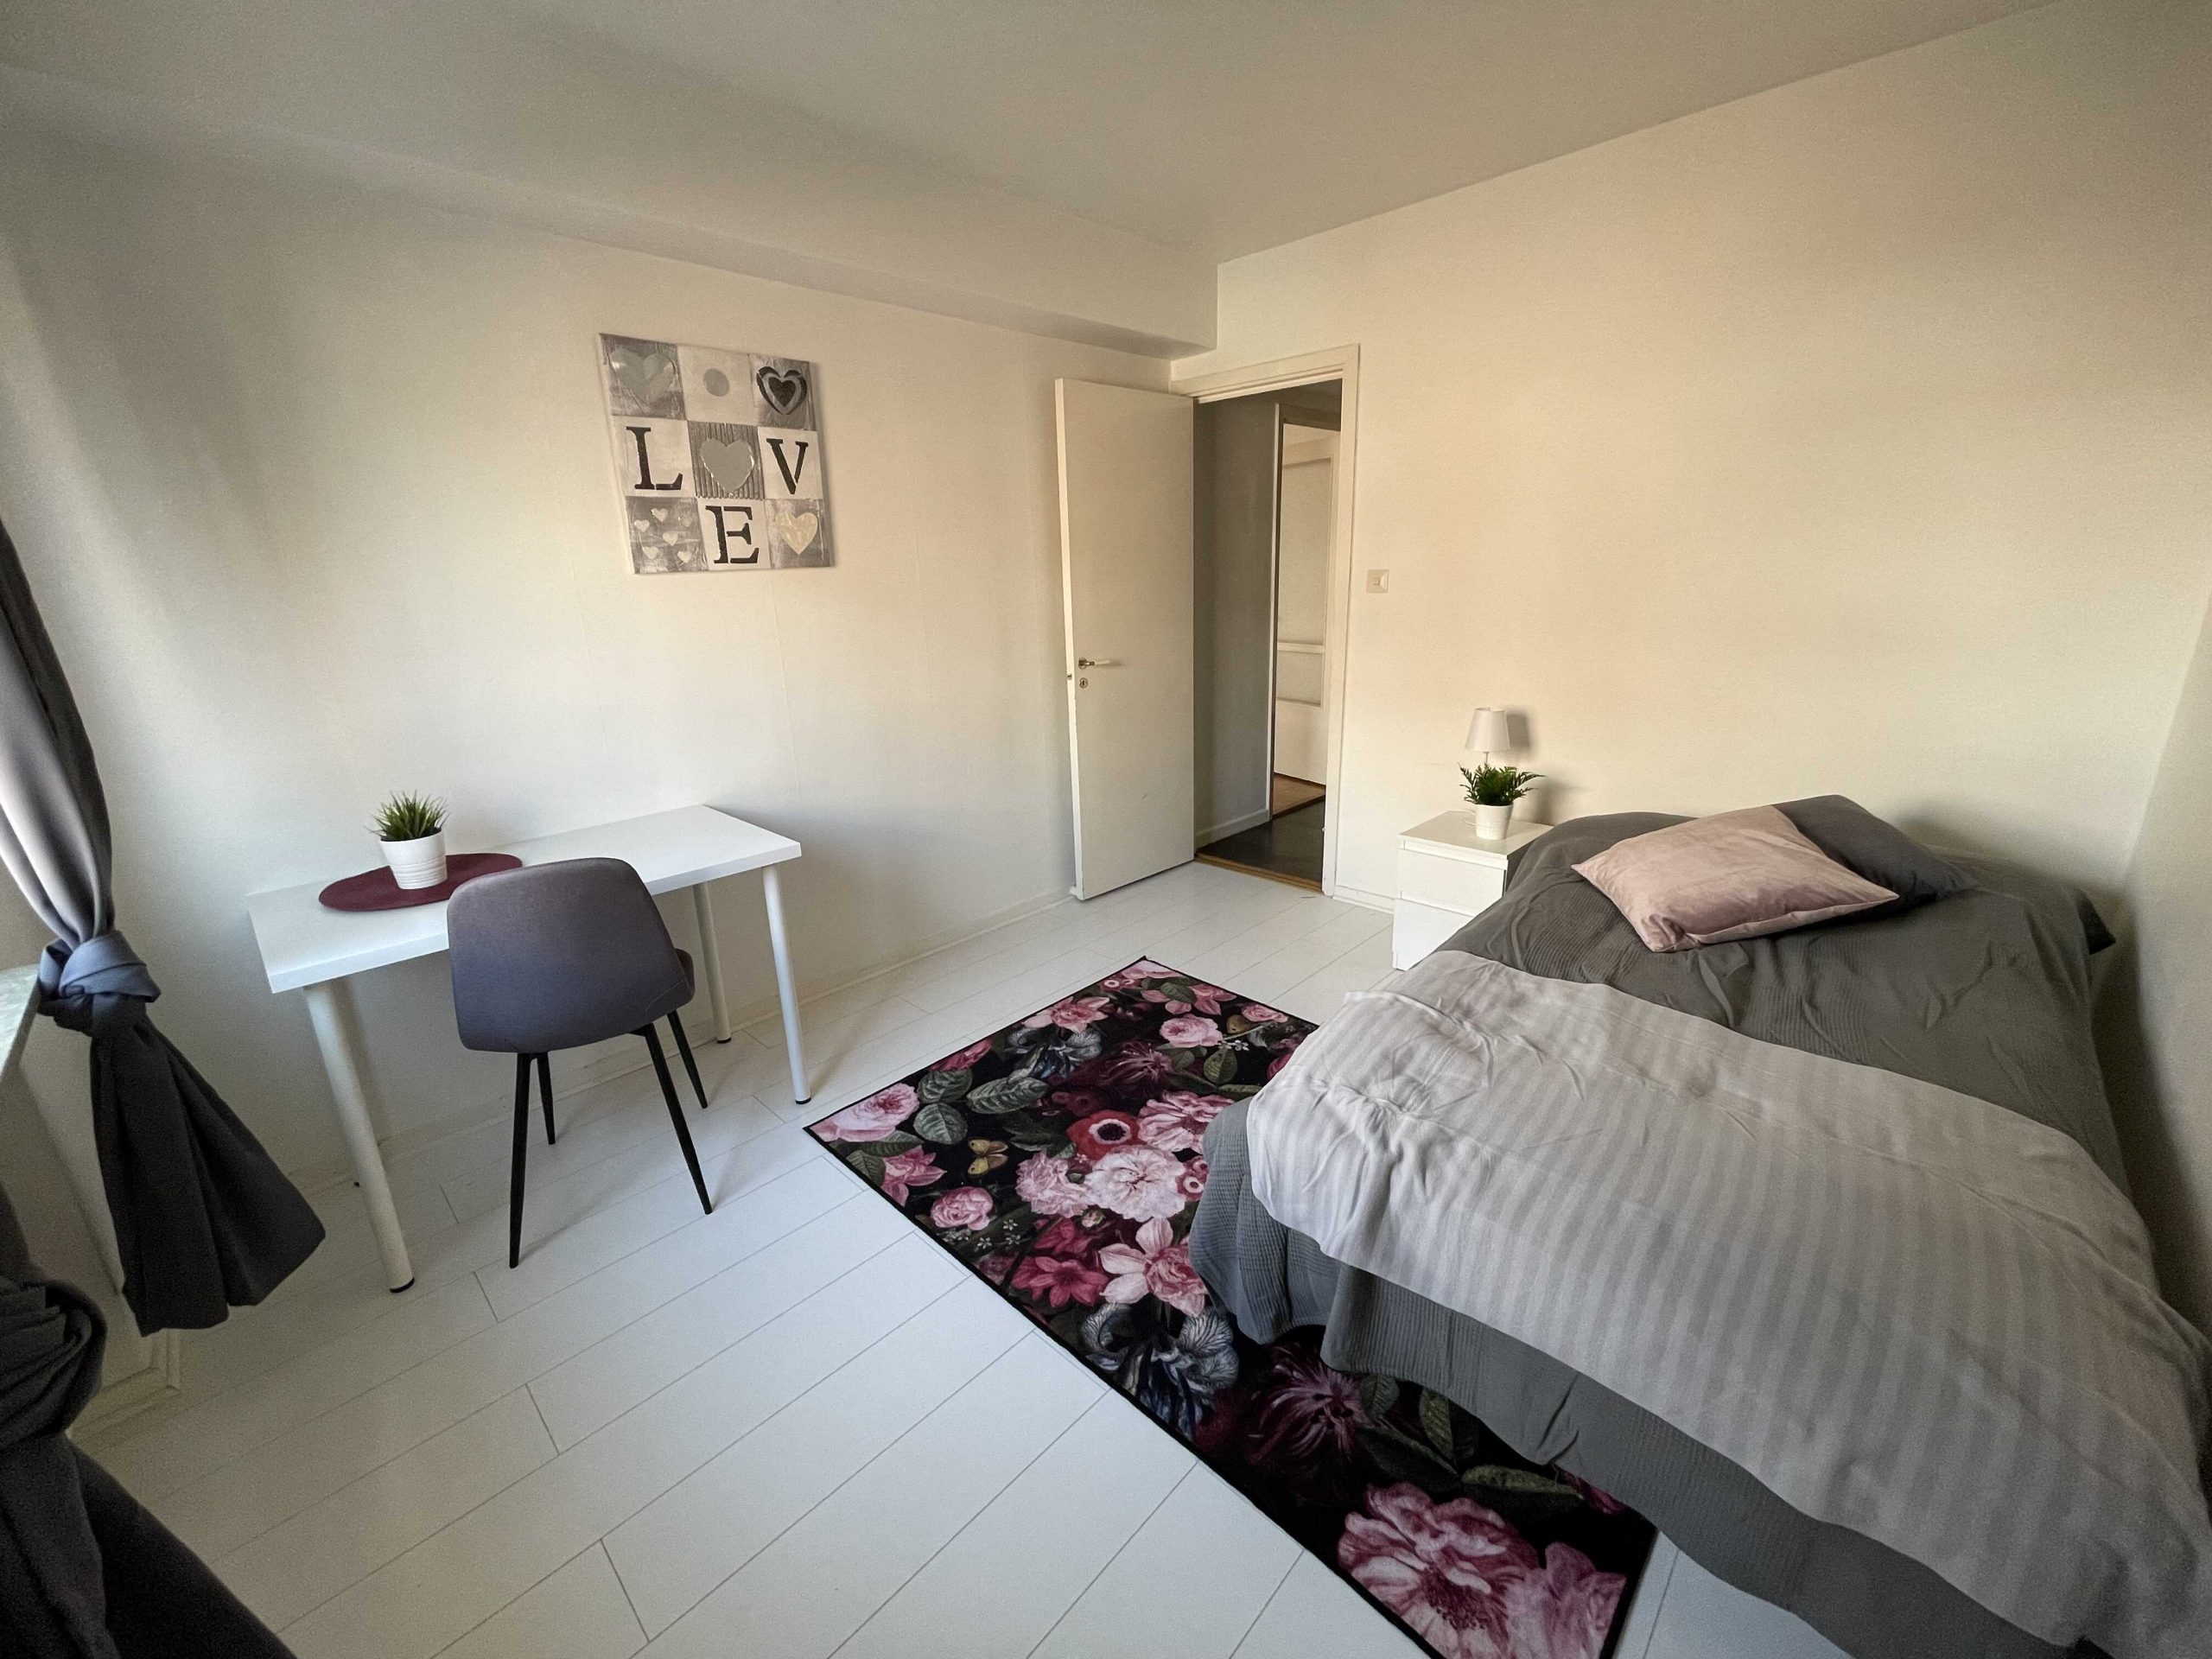 Serviced apartment, business accommodation, long stay, stay easy